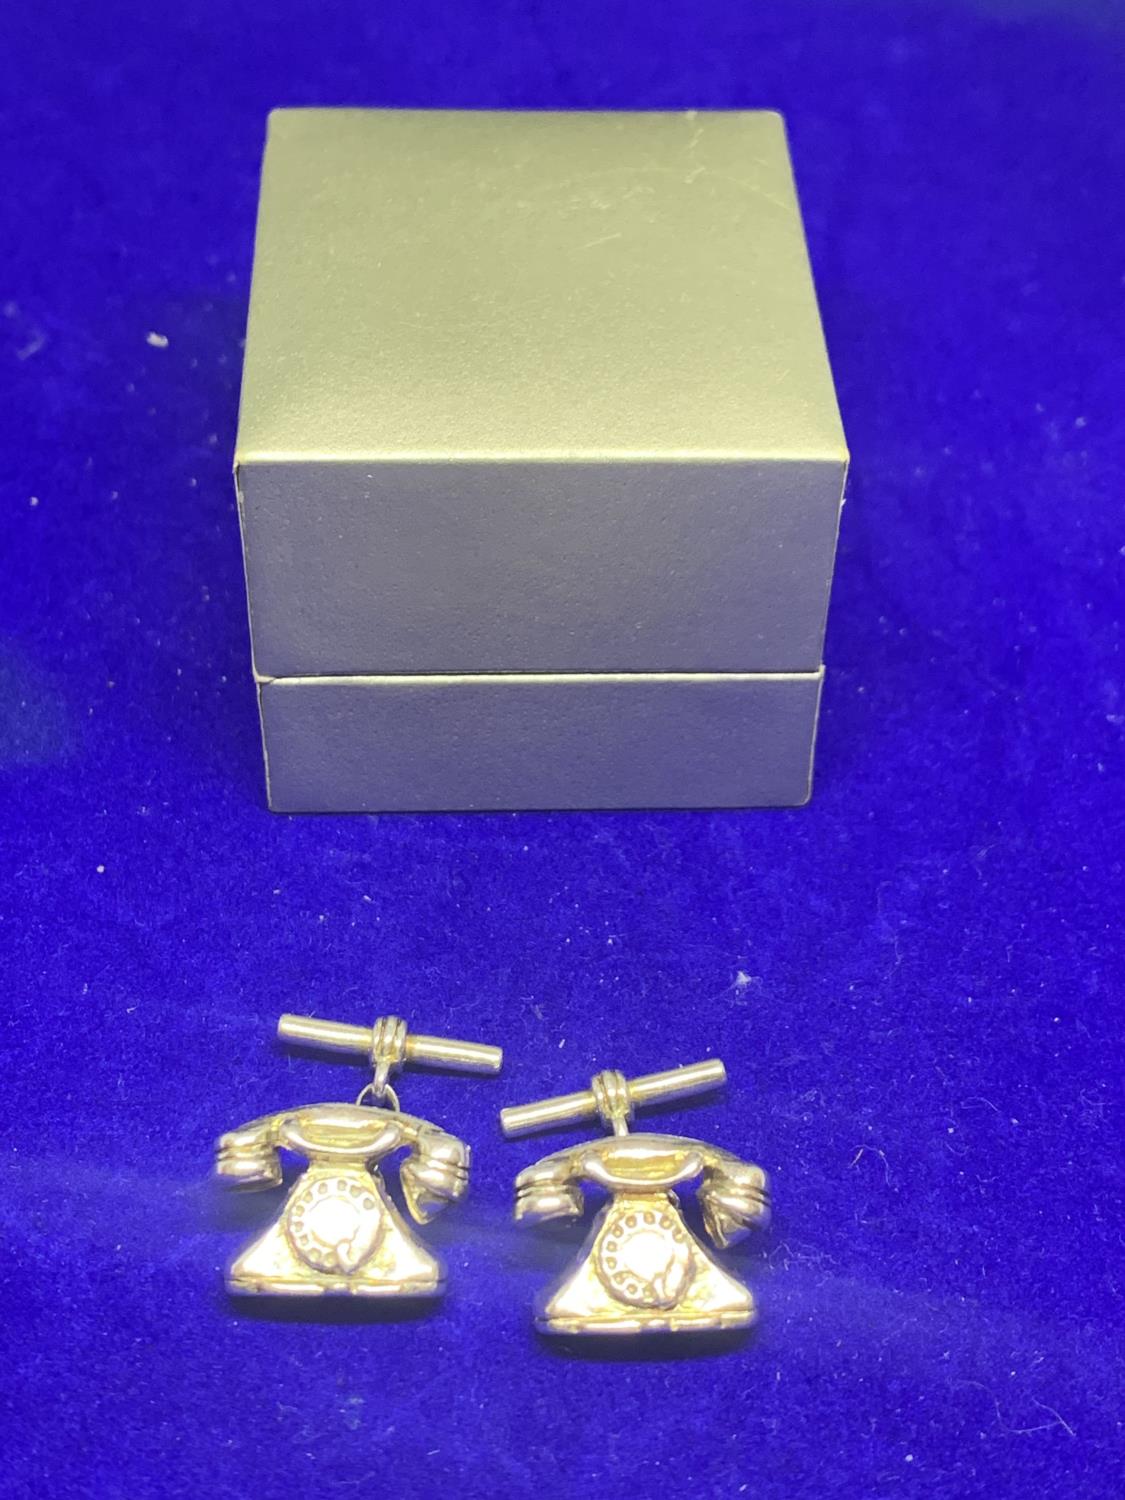 A PAIR OF HALLMARKED SILVER TELEPHONE STYLE CUFF LINKS IN A PRESENTATION BOX